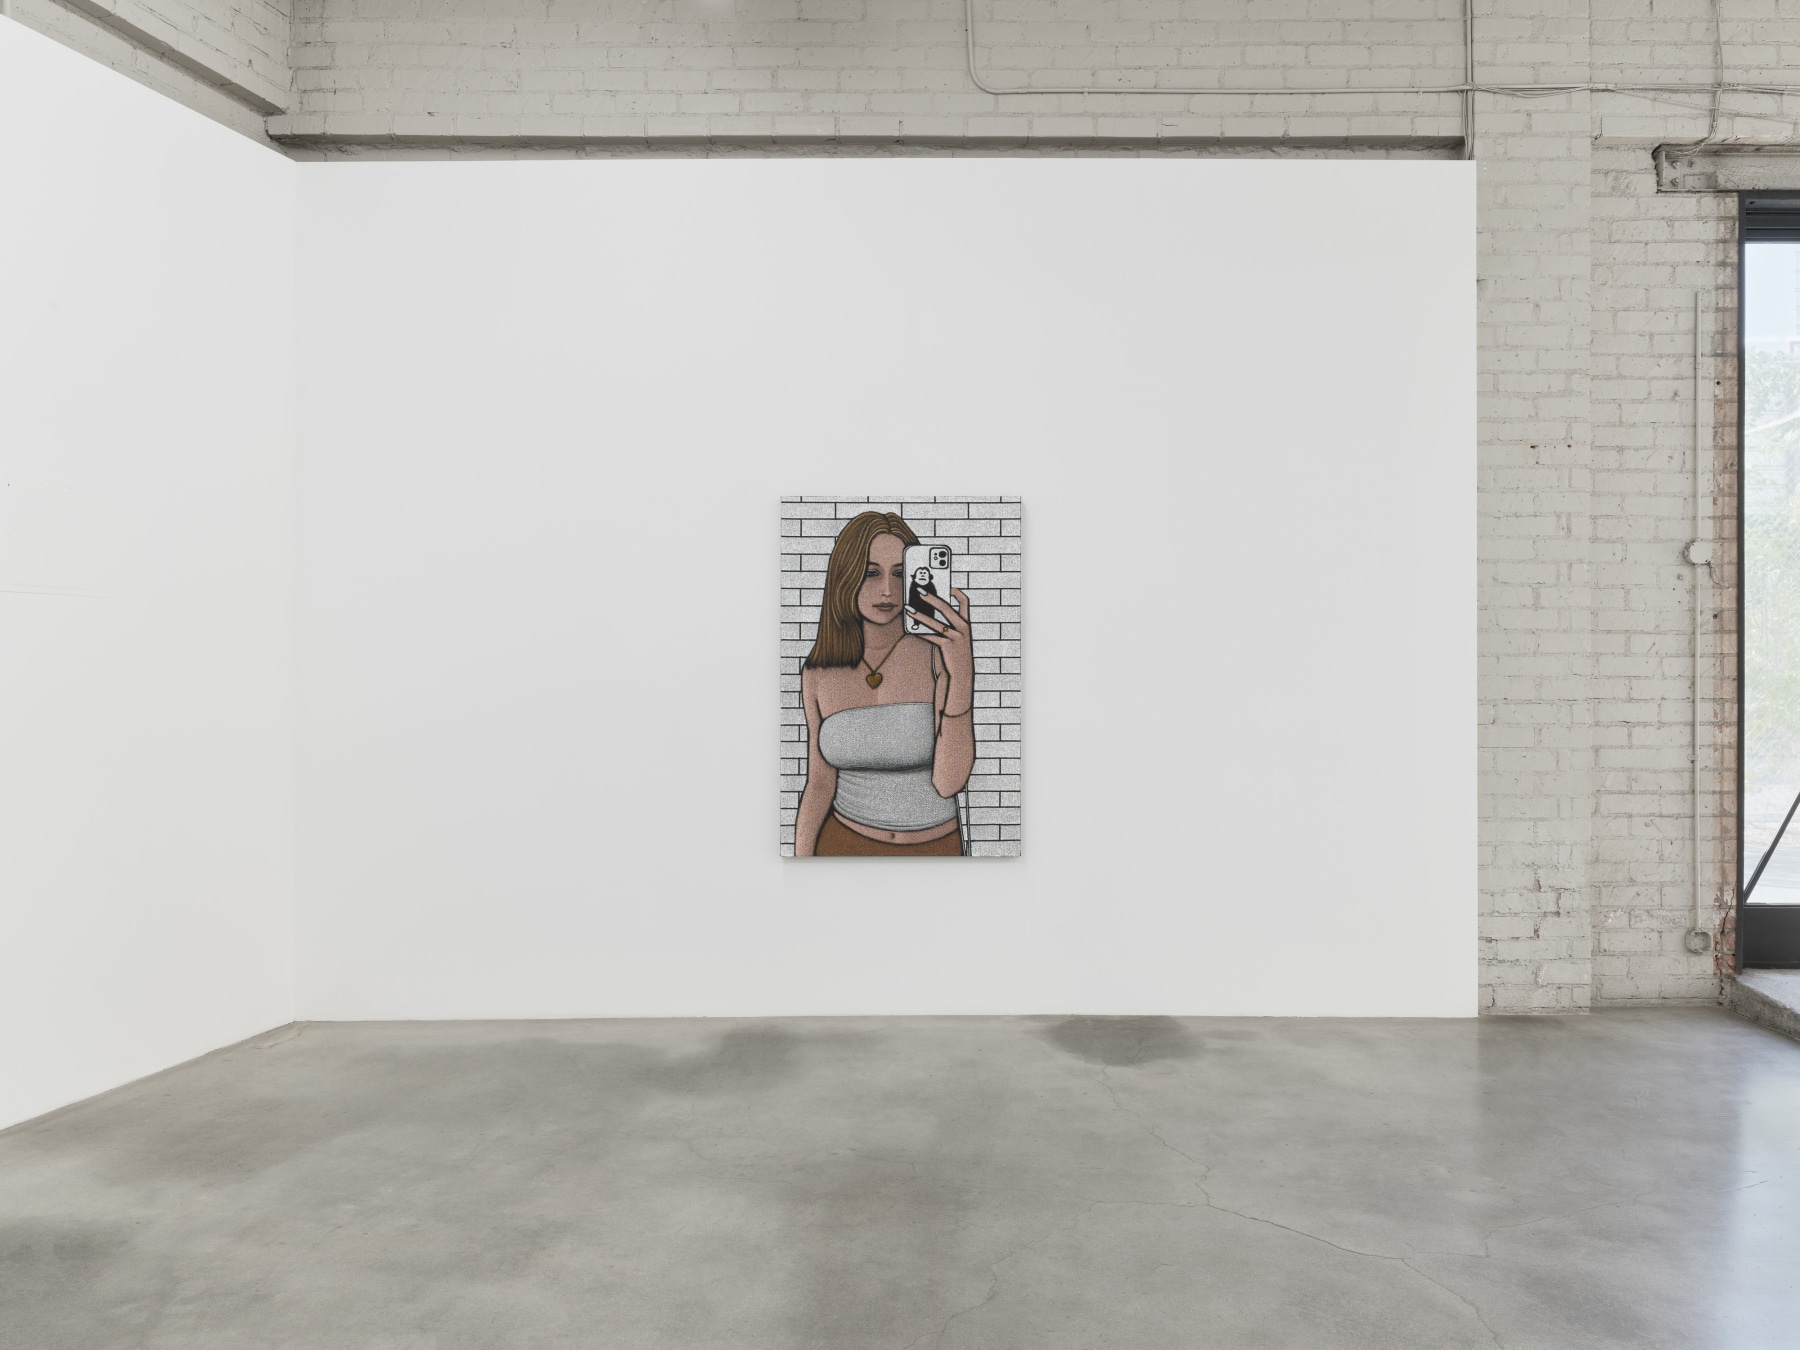 Installation view of Amy Adler's "Audition" at Night Gallery.